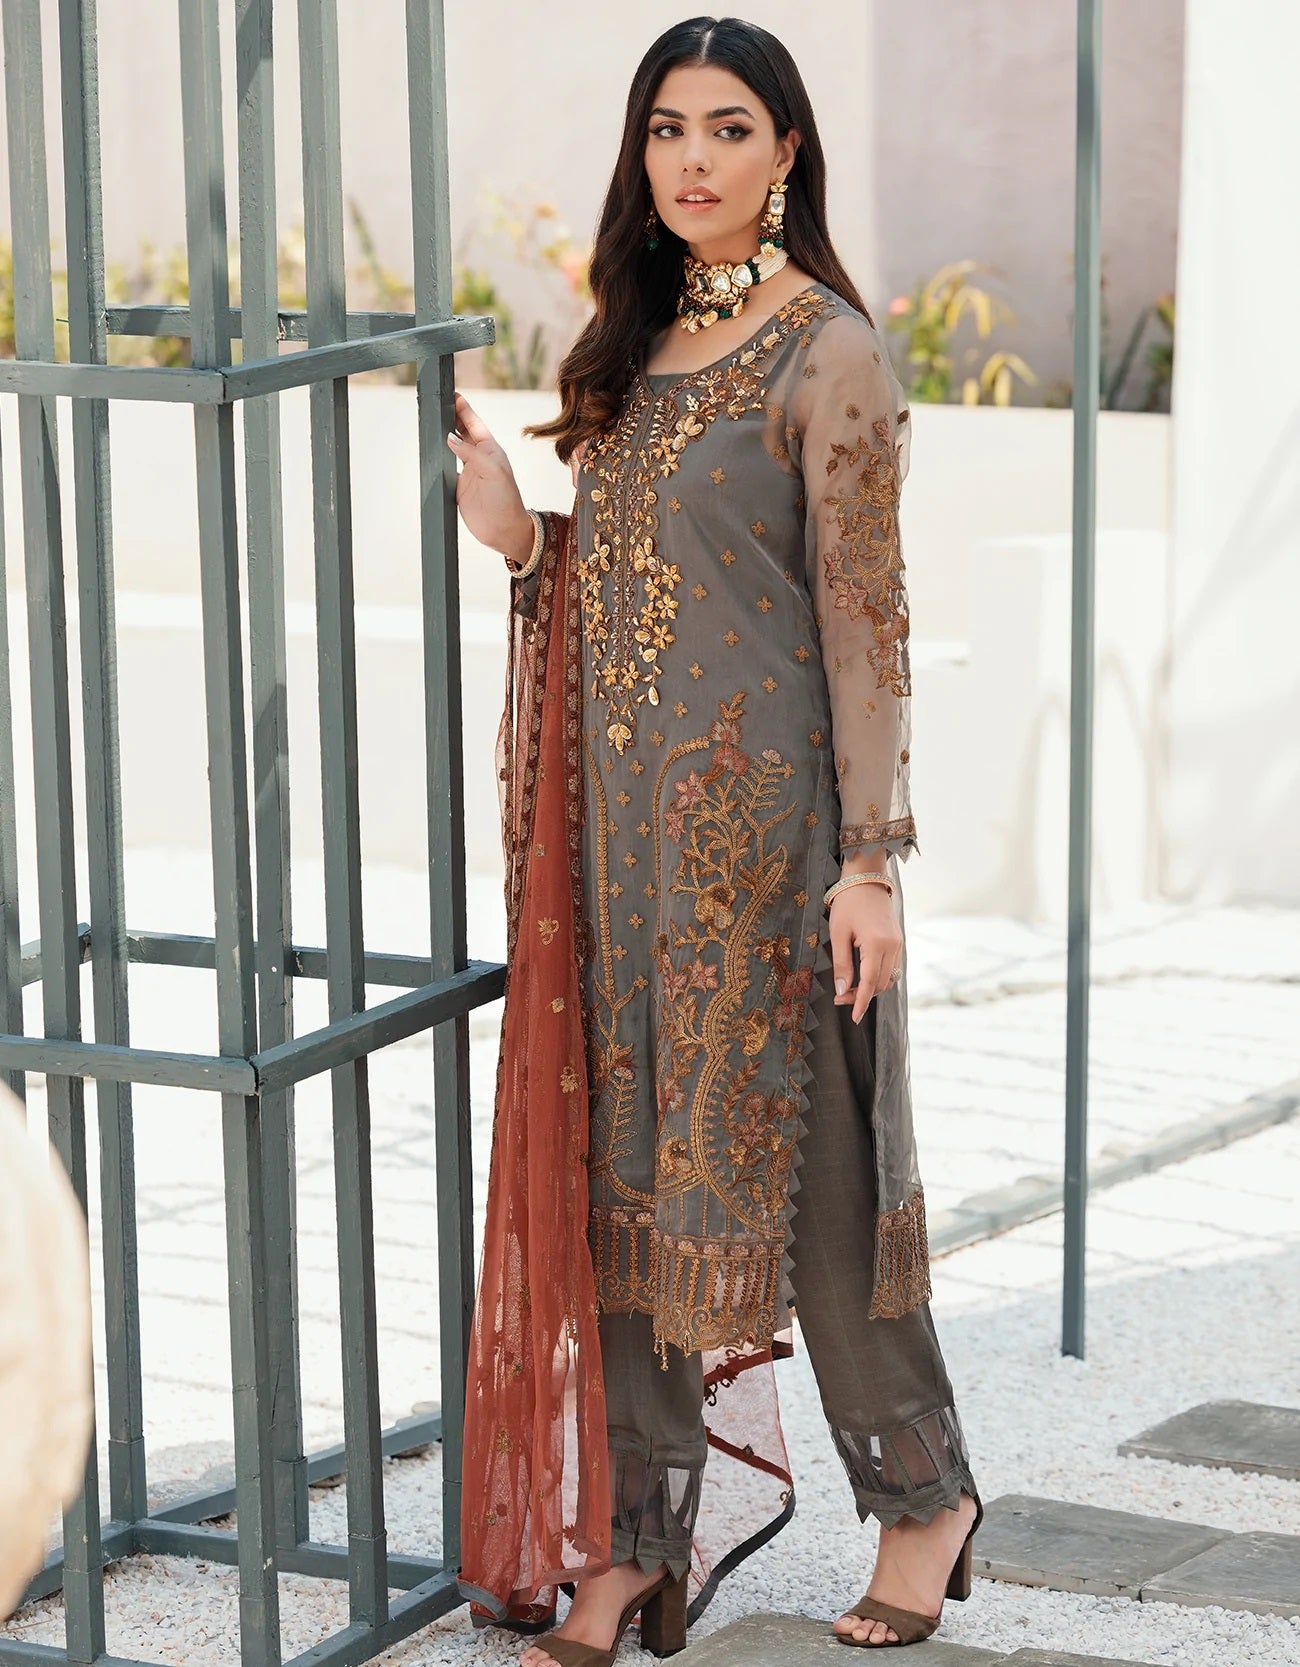 Nafasat By Emaan Adeel Embroidered Organza Suits Unstitched 3 Piece NF-03